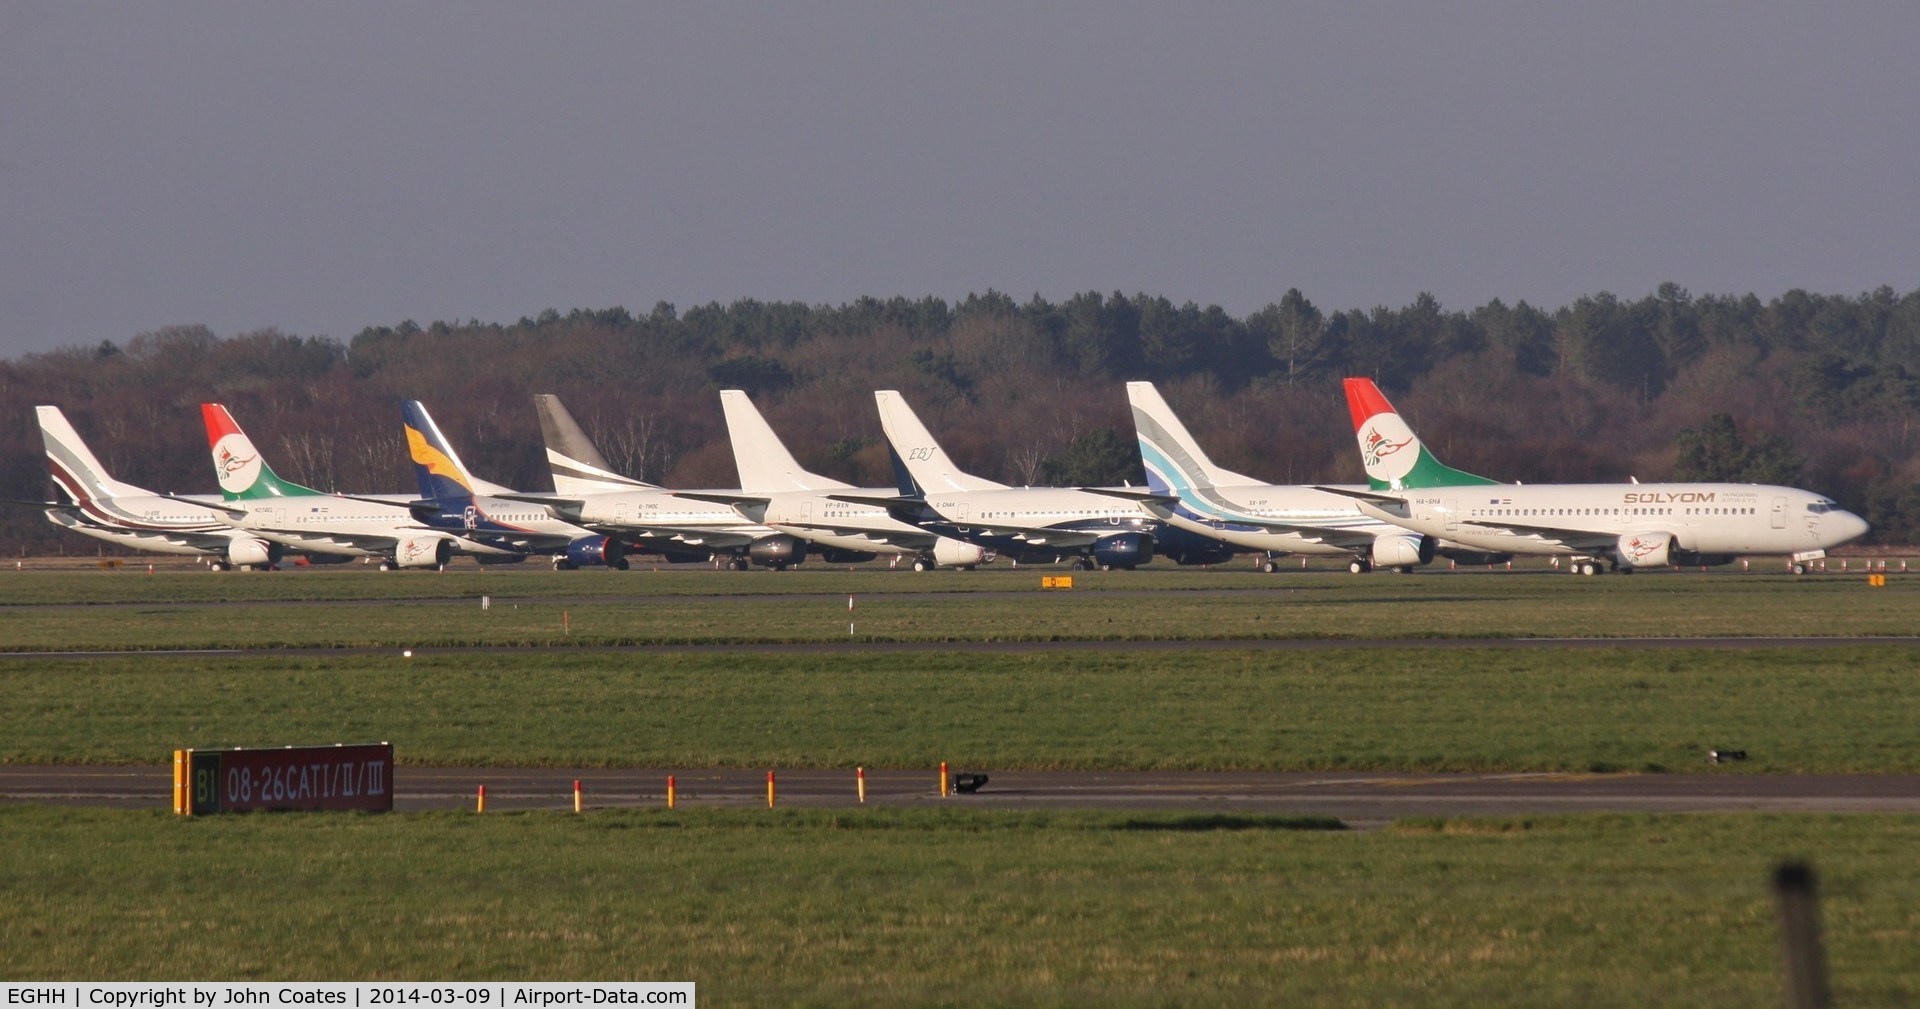 Bournemouth Airport, Bournemouth, England United Kingdom (EGHH) - Current line up of 737s from European